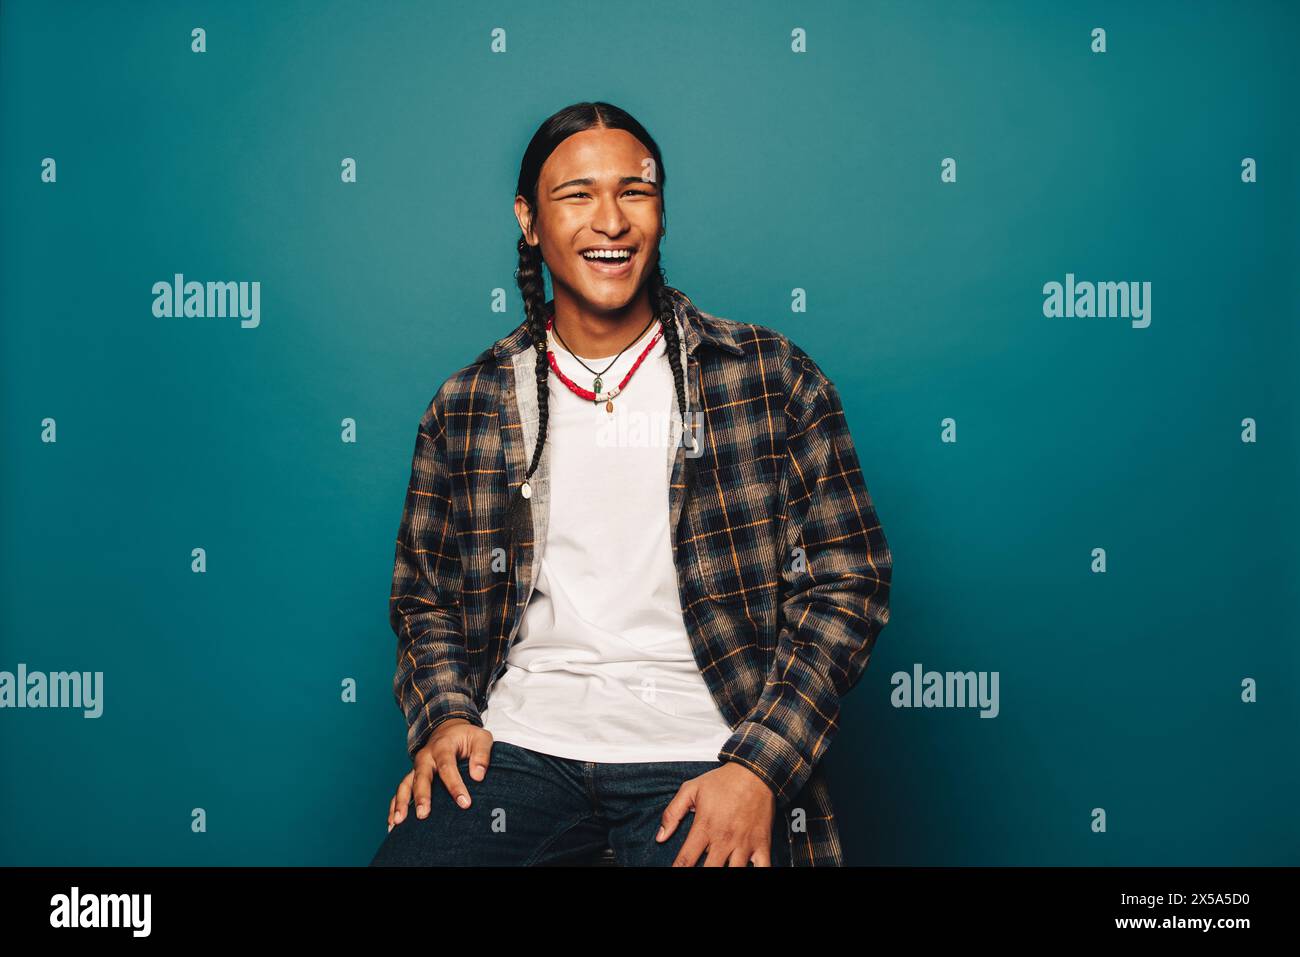 Confident, happy Native man with braided hair and ethnic jewelry poses in a studio wearing casual clothing and blue background. Stock Photo